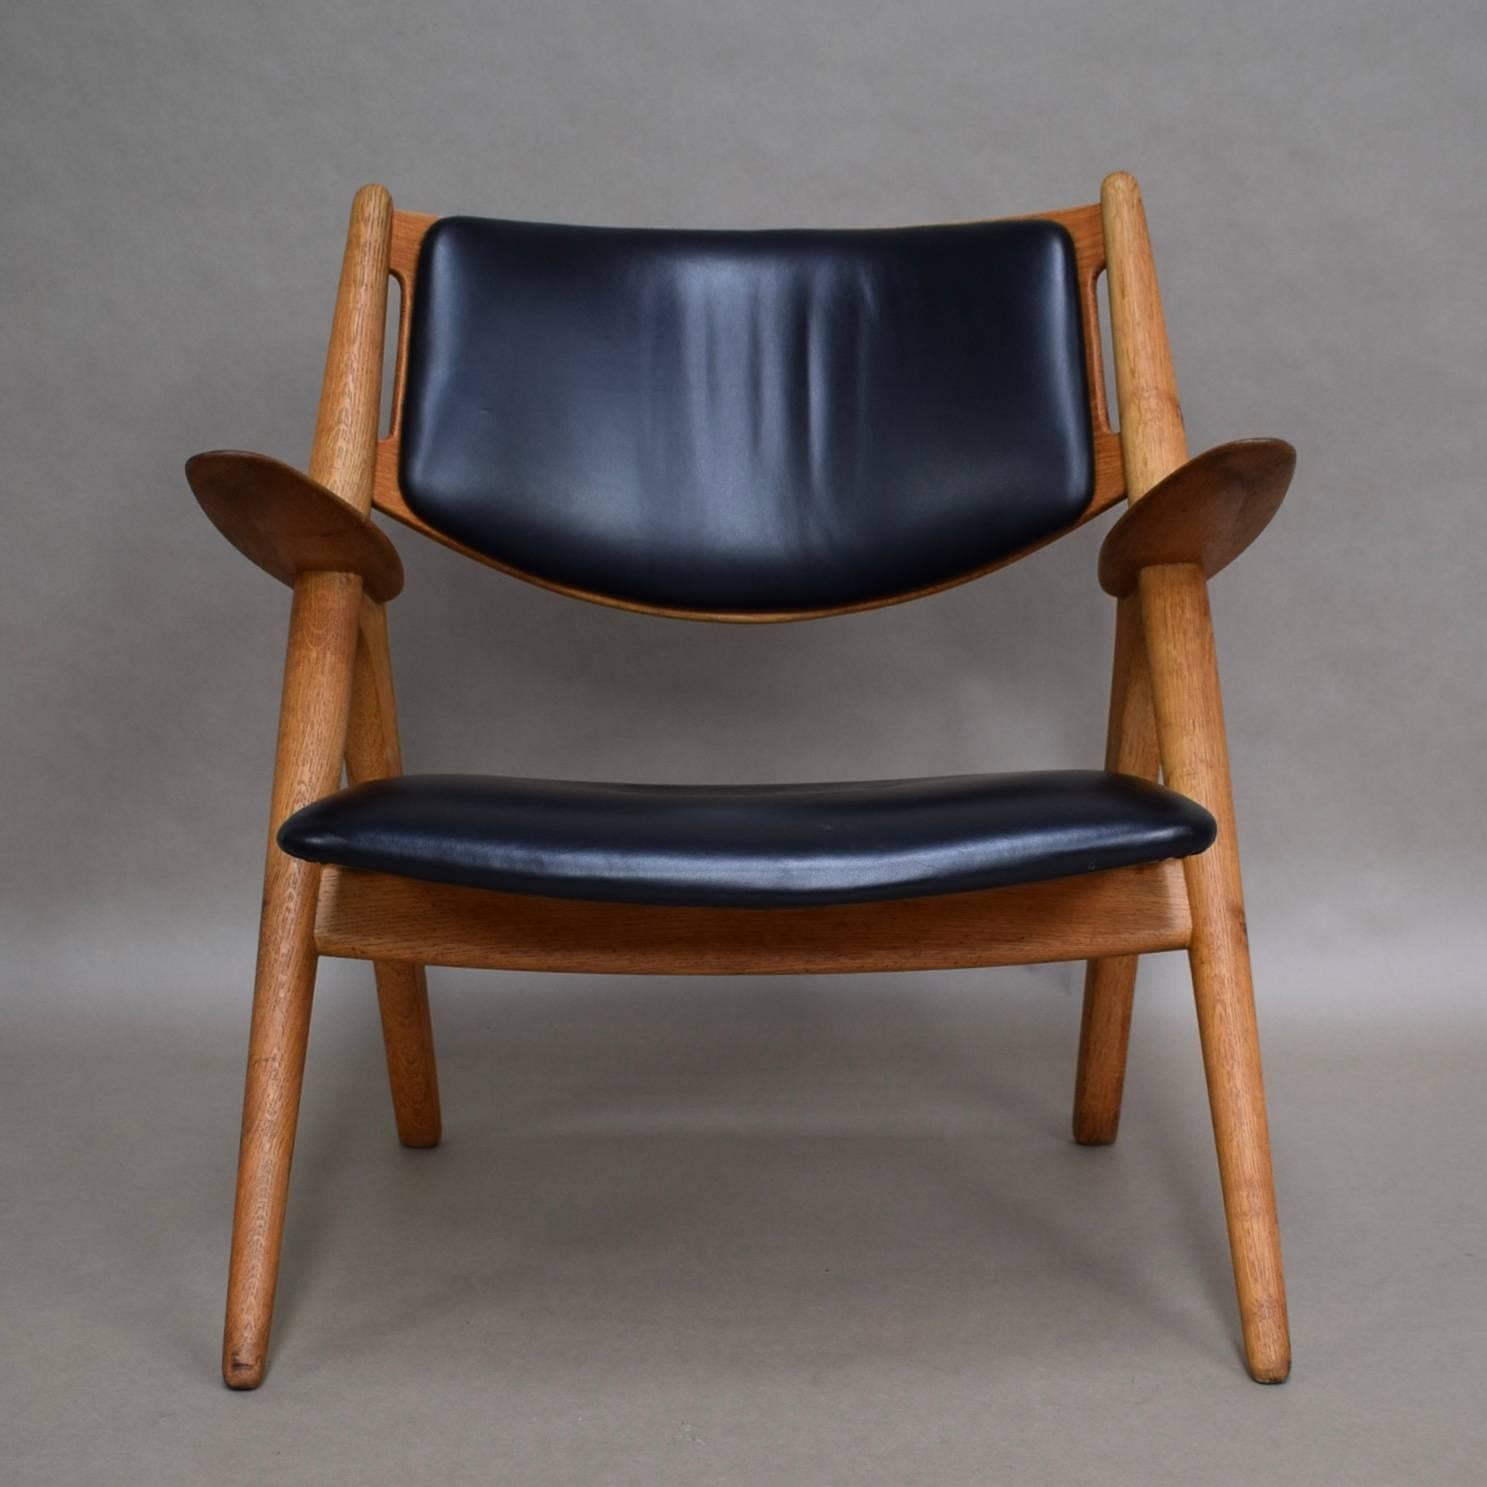 CH28 Sawbuck lounge chairs by Hans J. Wegner for Carl Hansen and Son, Denmark.
Two chairs available.

Manufacturer: Carl Hansen and Son

Designer: Hans J. Wegner

Country: Denmark

Model: CH-28 Sawbuck lounge chair

Material: Teak / oak /